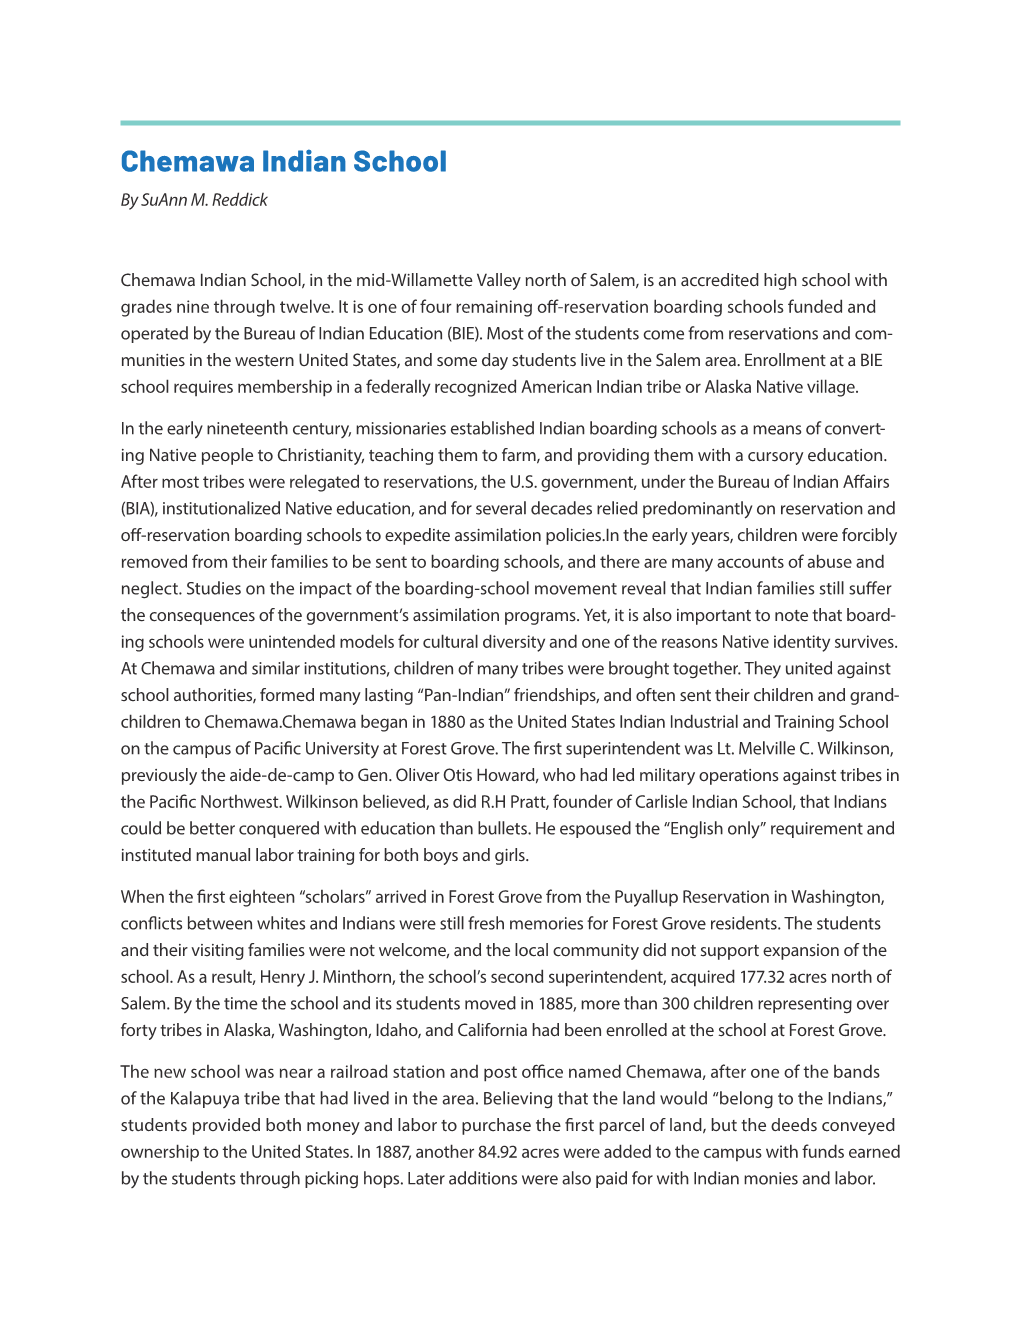 Chemawa Indian School by Suann M